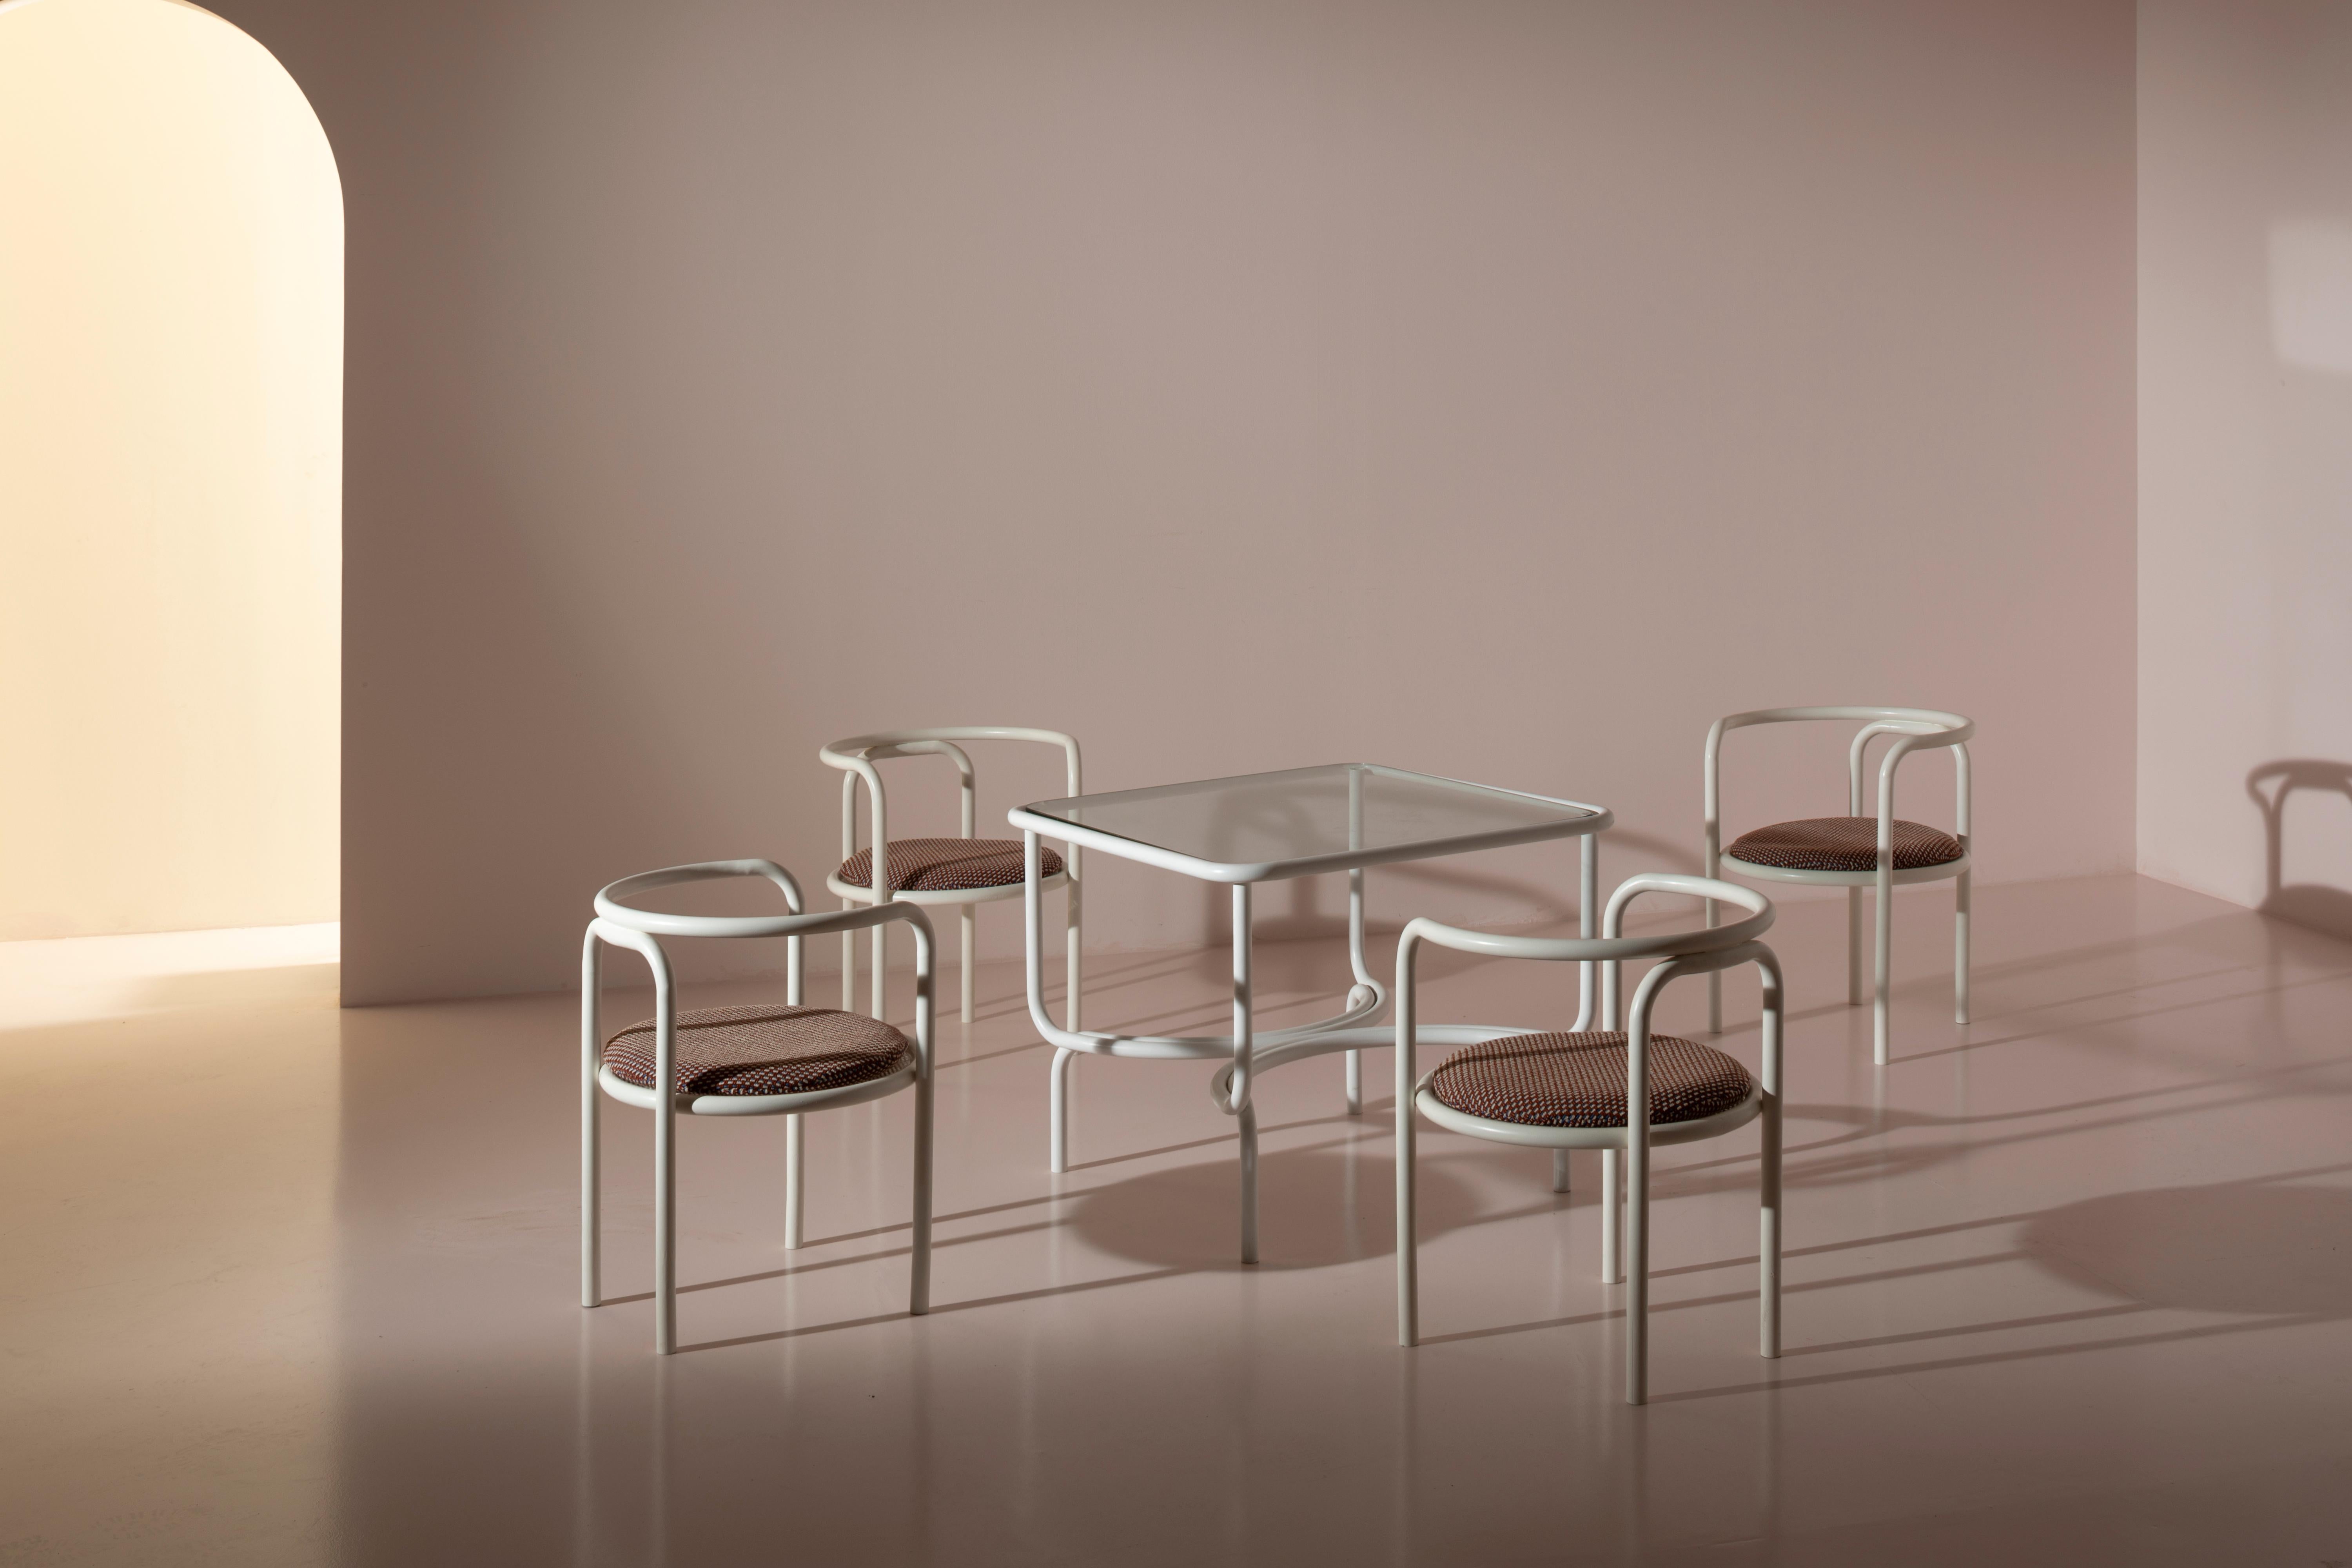 Tubular metal garden set consisting of a table and four armchairs, model Locus Solus, designed by Gae Aulenti, produced by Poltronova in 1964.

A painted metal tube unpredictably bends and takes the form of tables, chairs, and armchairs, as if